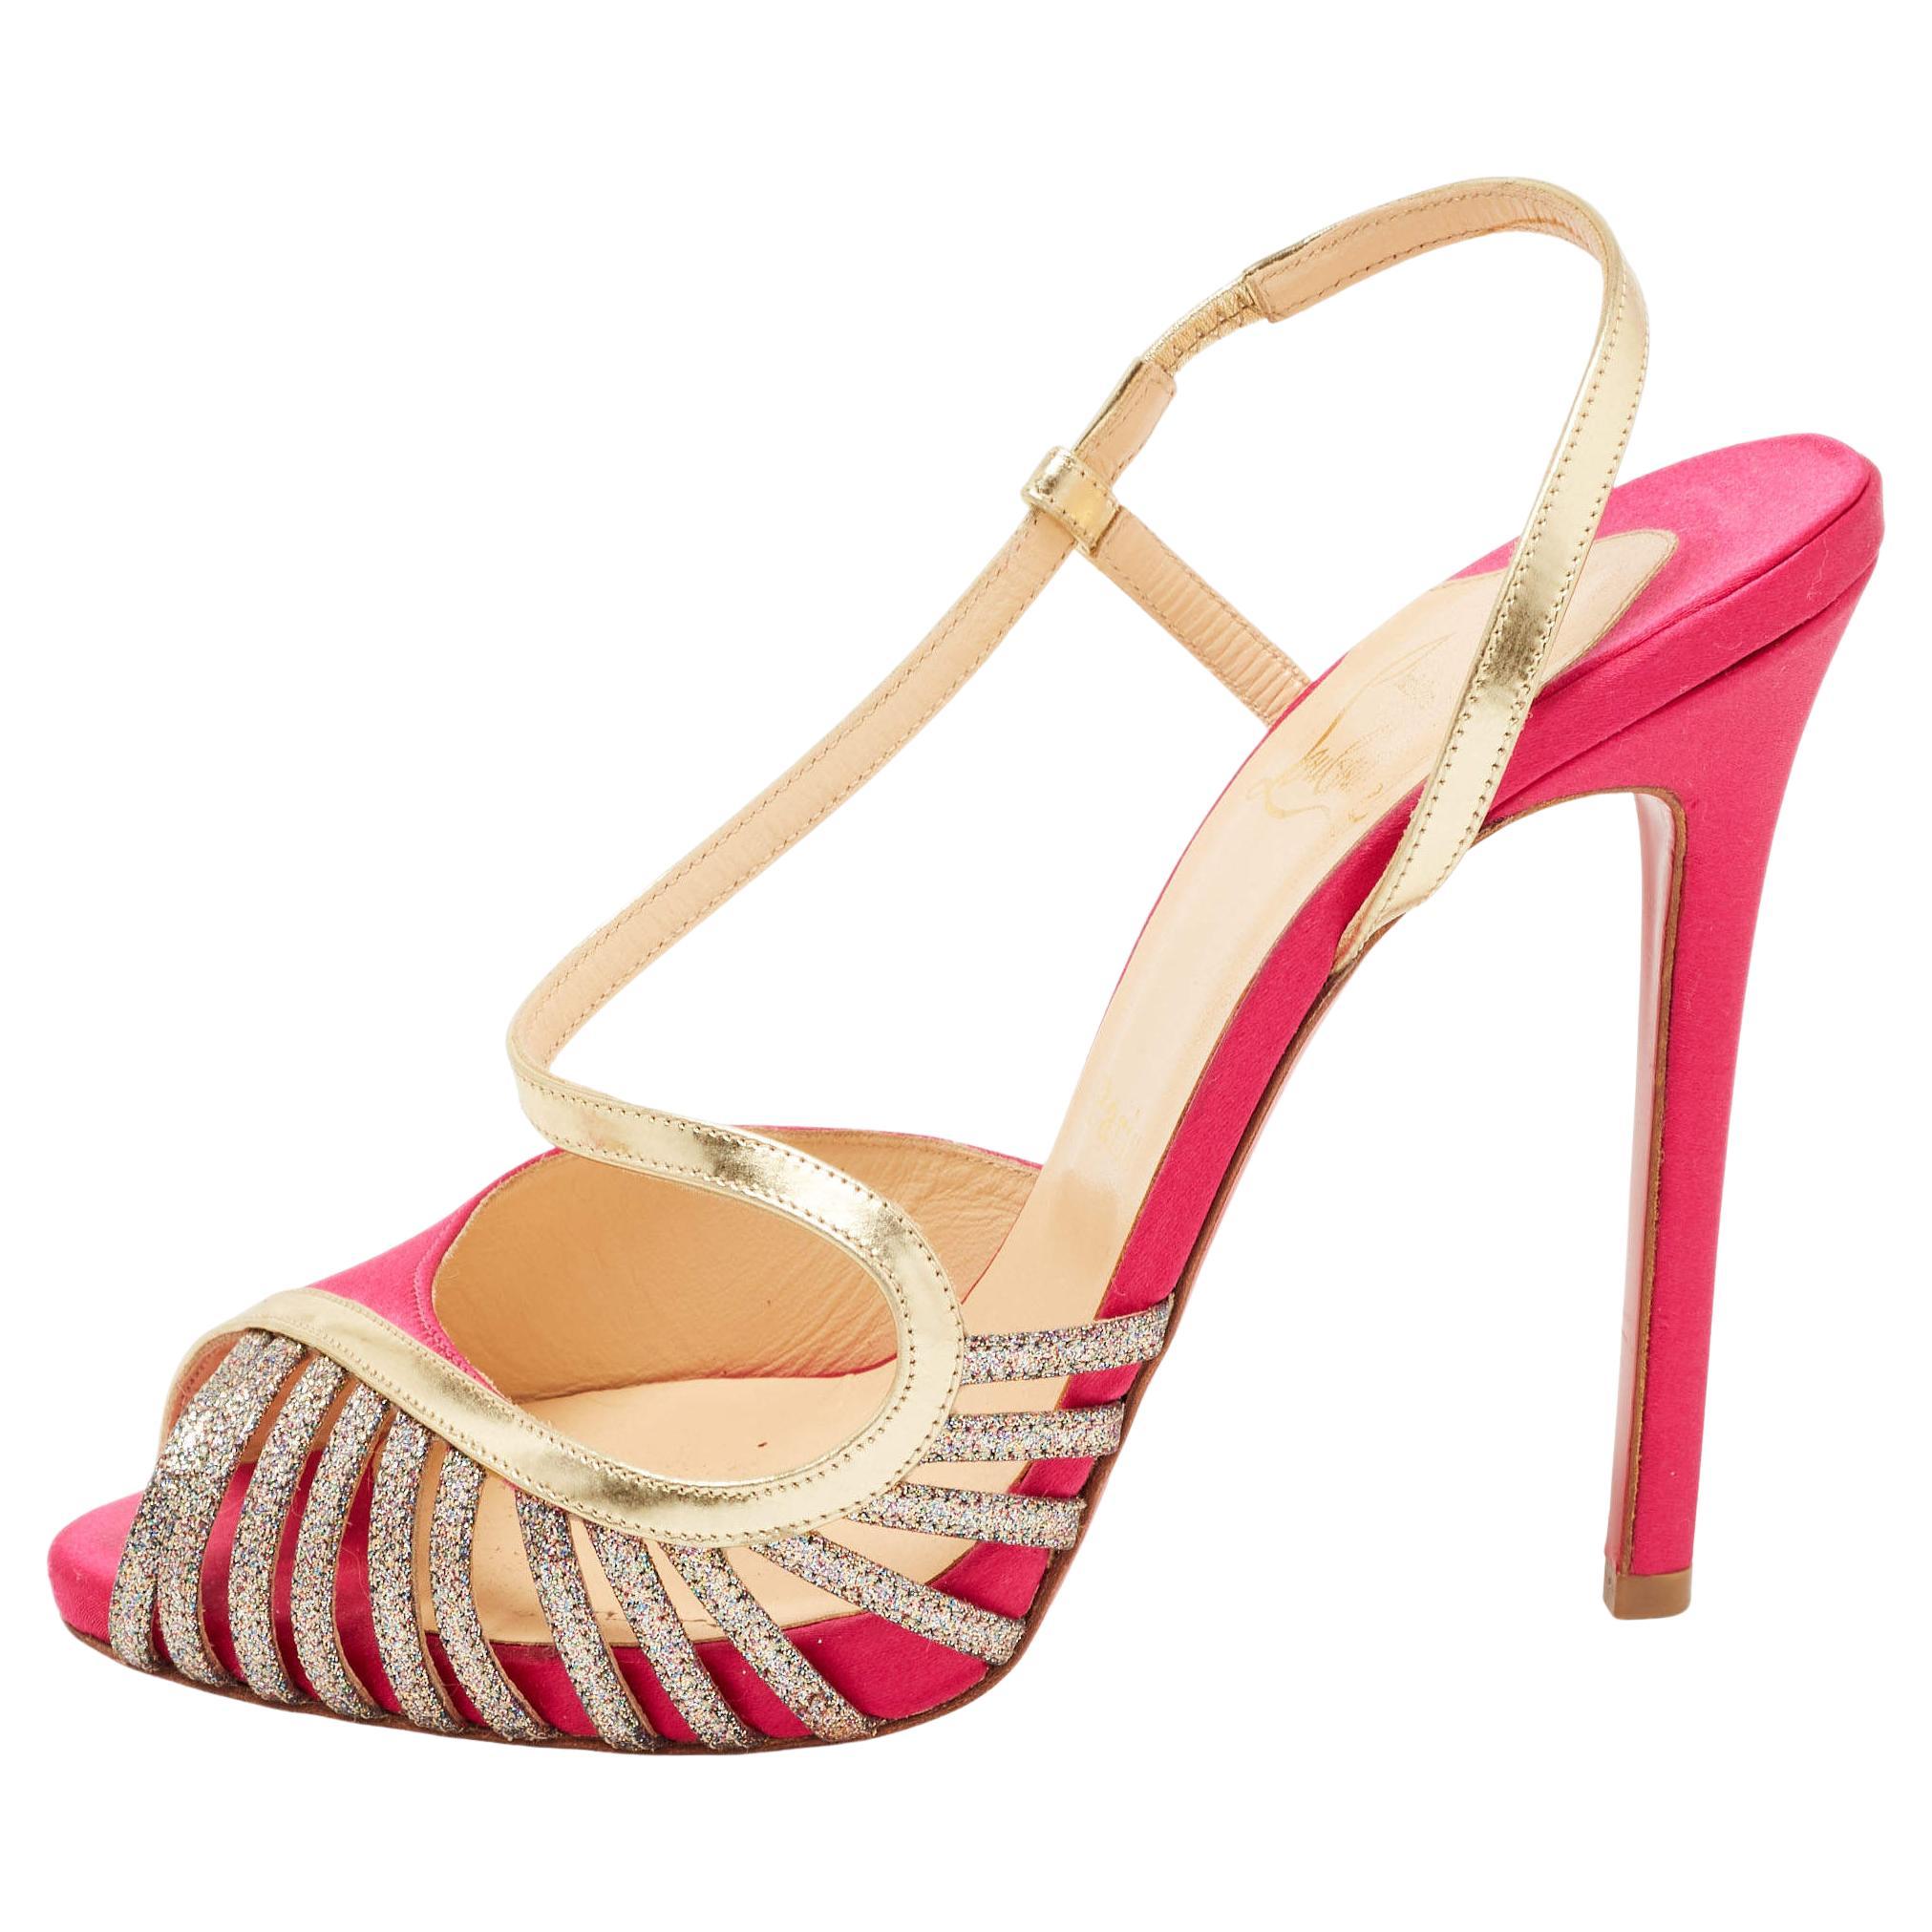 Christian Louboutin Pink/Gold Satin, Leather and Glitter Strappy Sandals Size 39